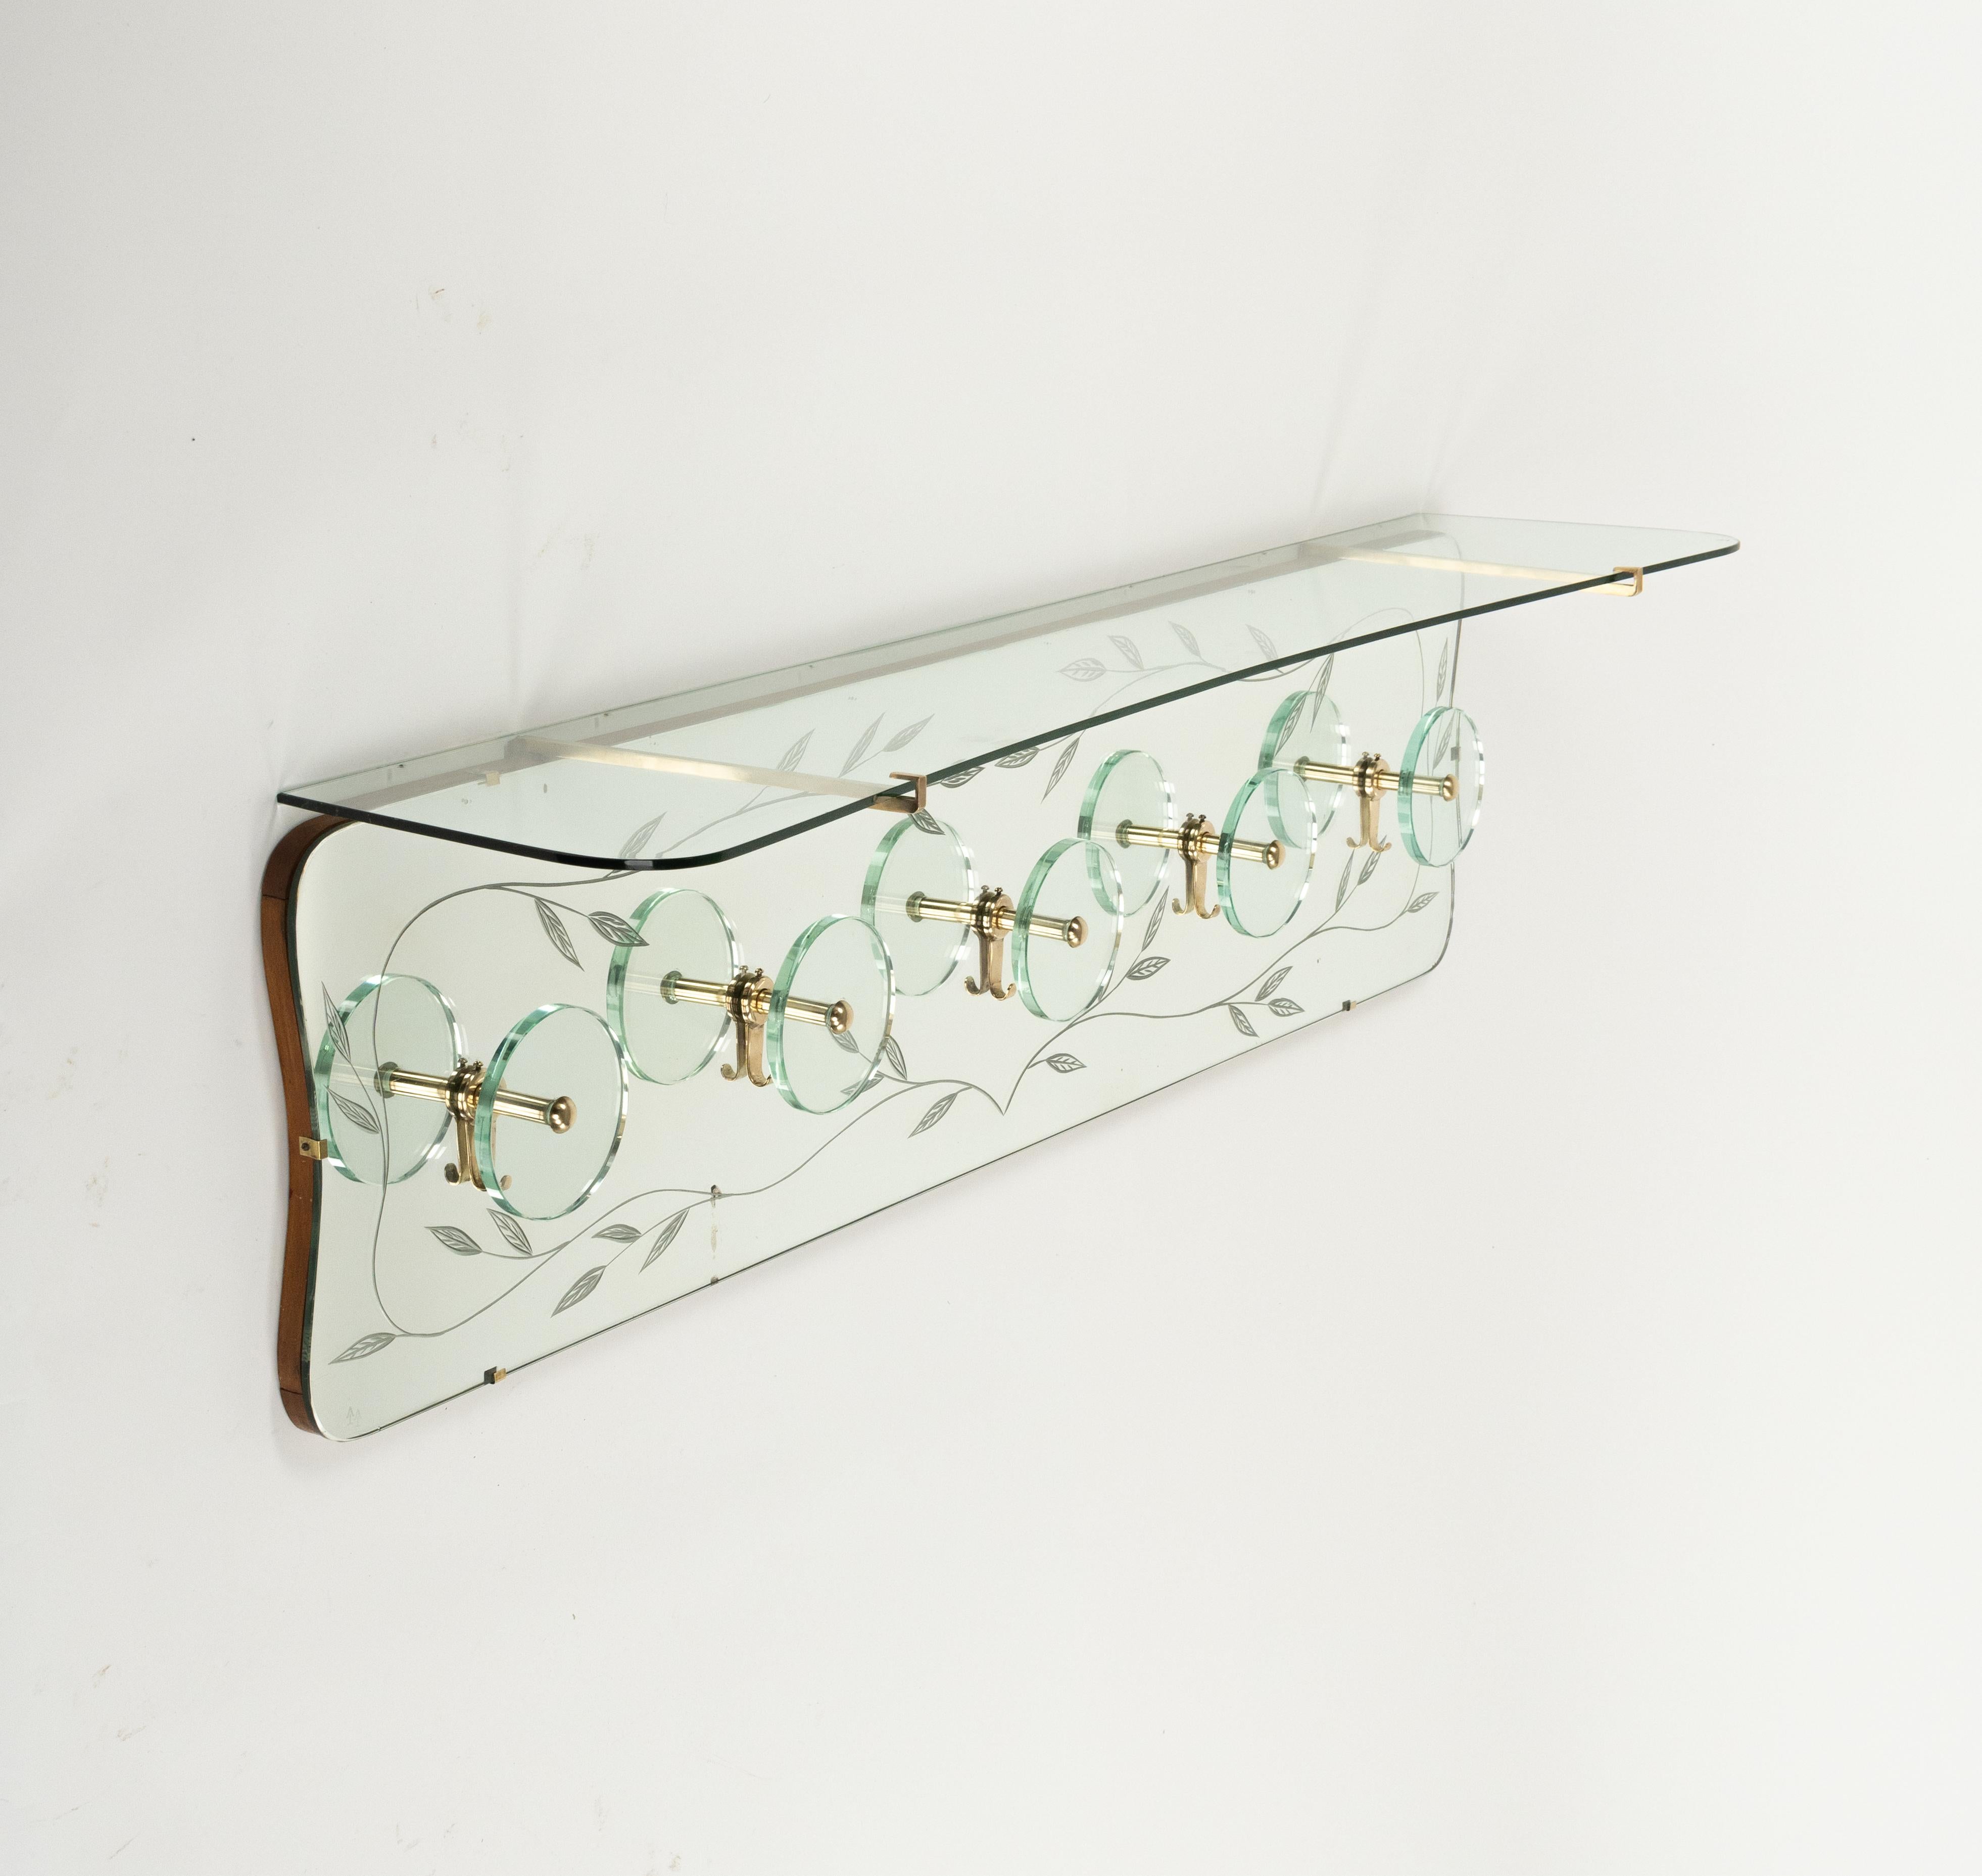 Midcentury Coat Rack Shelf in Mirror, Brass & Glass by Cristal Art, Italy, 1950s For Sale 2